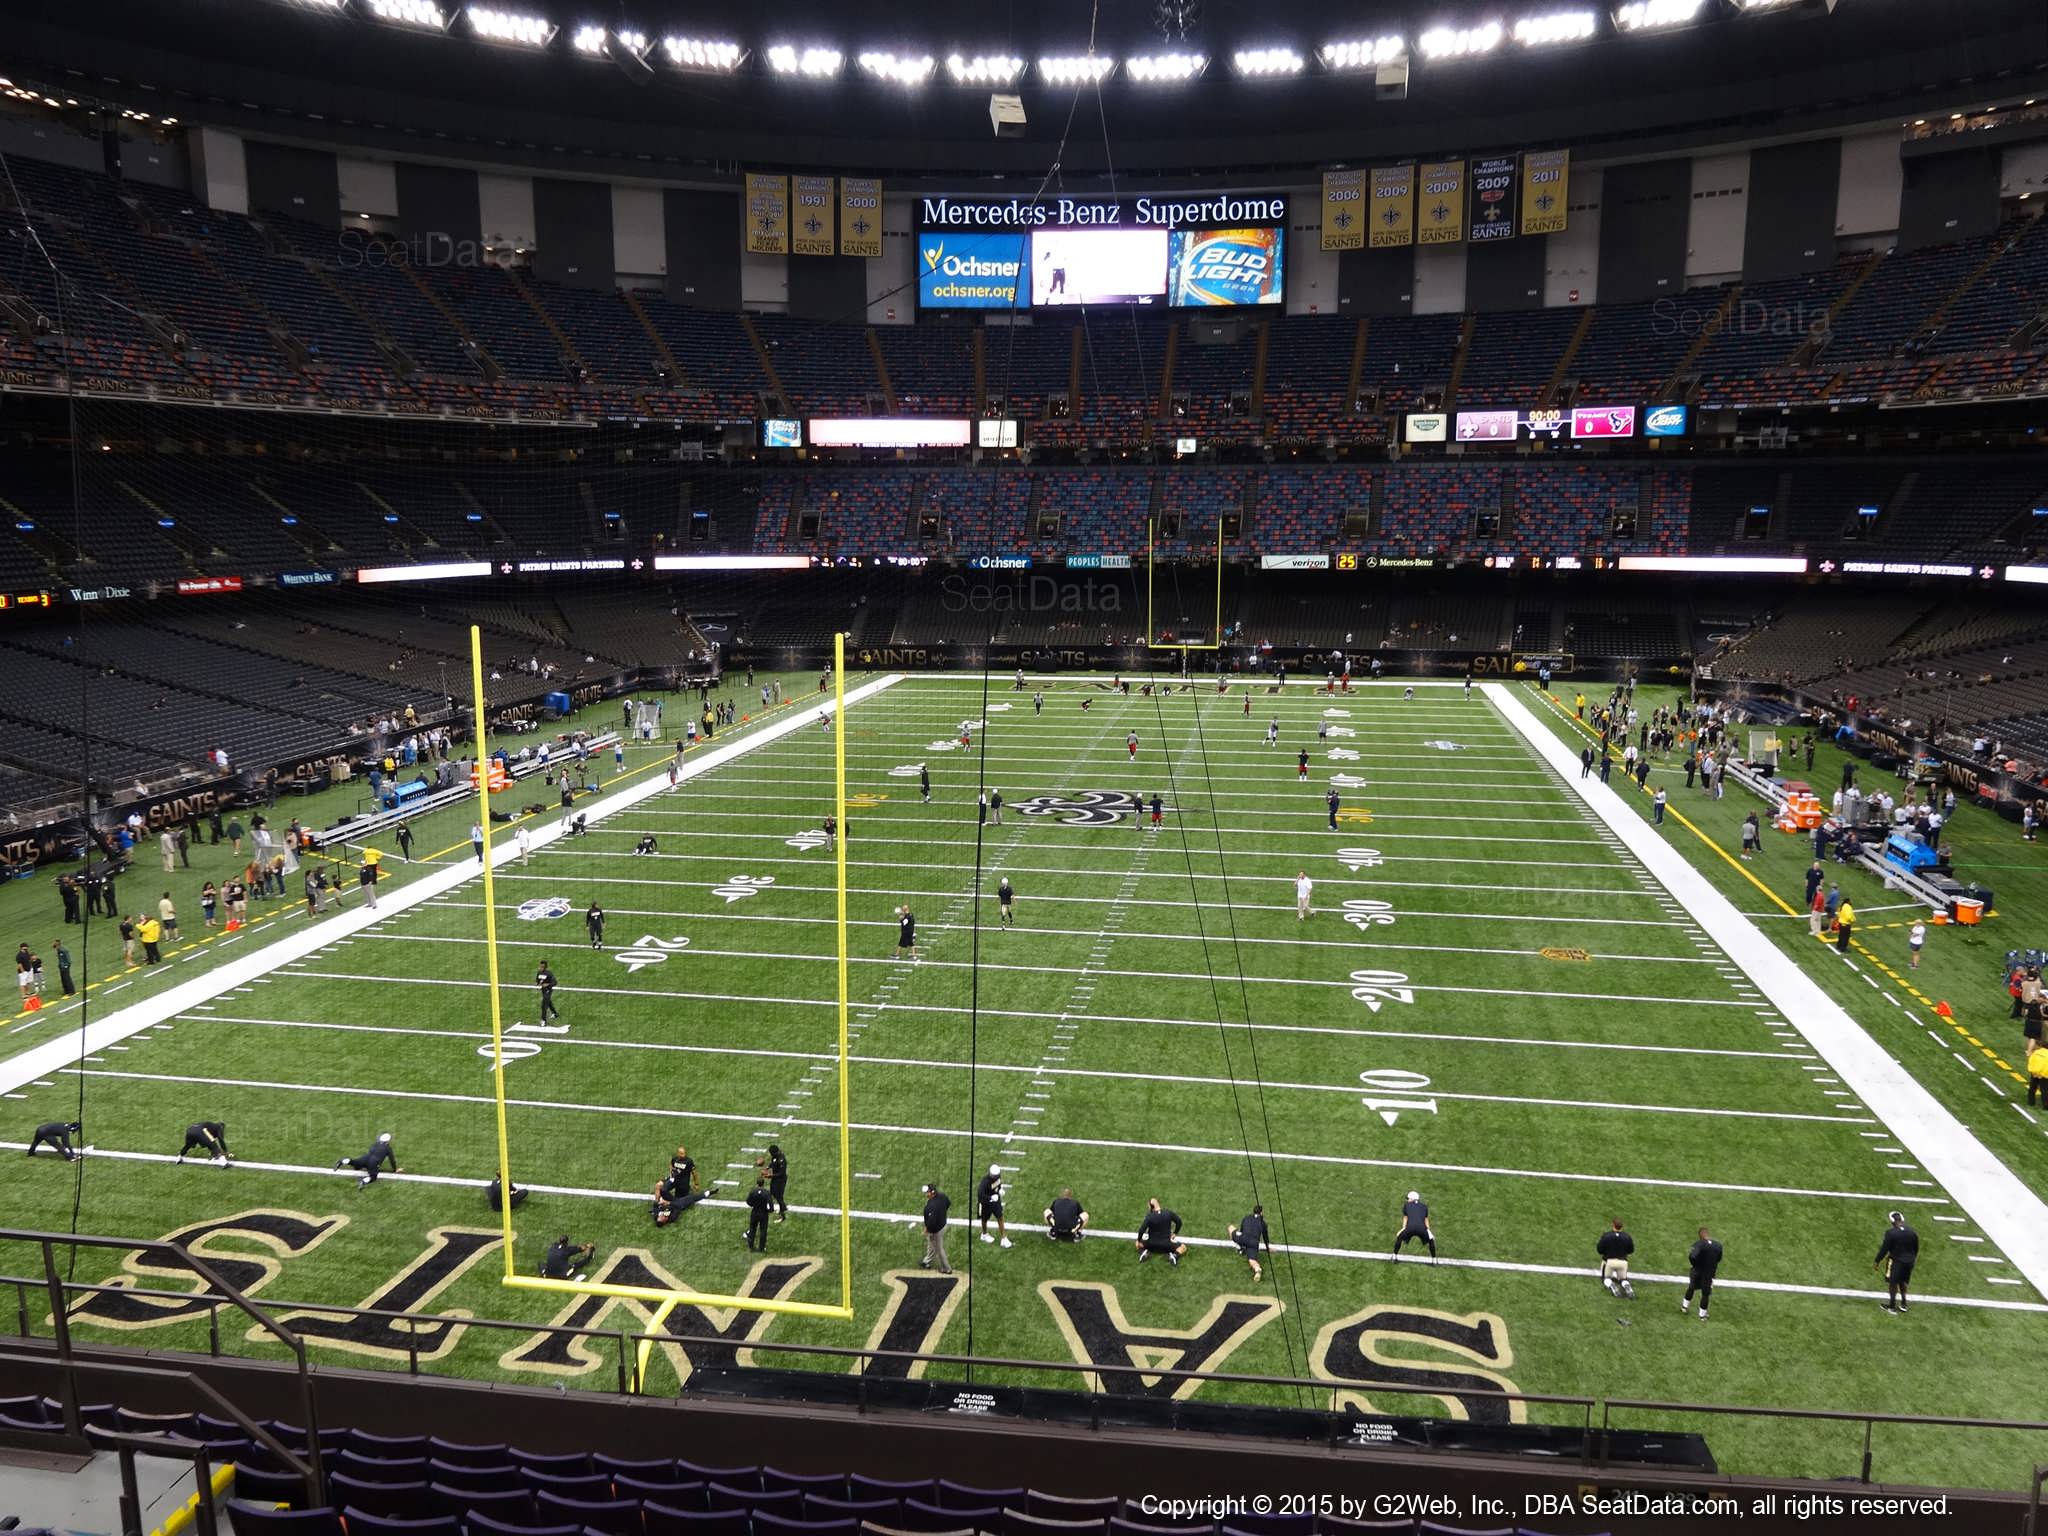 Seat view from section 323 at the Mercedes-Benz Superdome, home of the New Orleans Saints